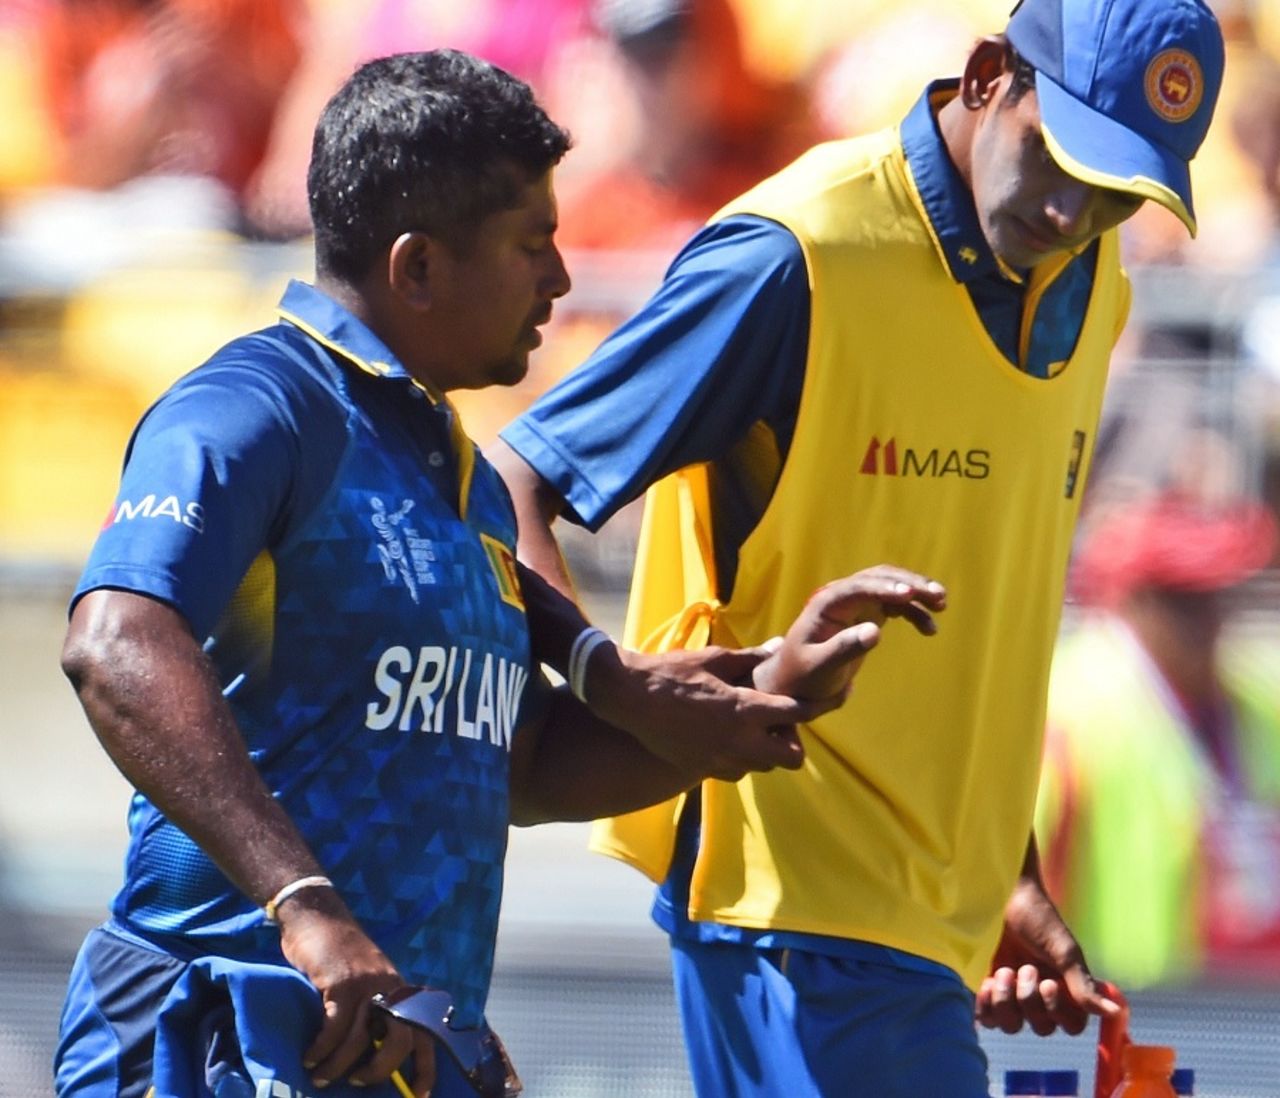 Rangana Herath went off the field after being struck on his hand, England v Sri Lanka, World Cup 2015, Group A, Wellington, March 1, 2015